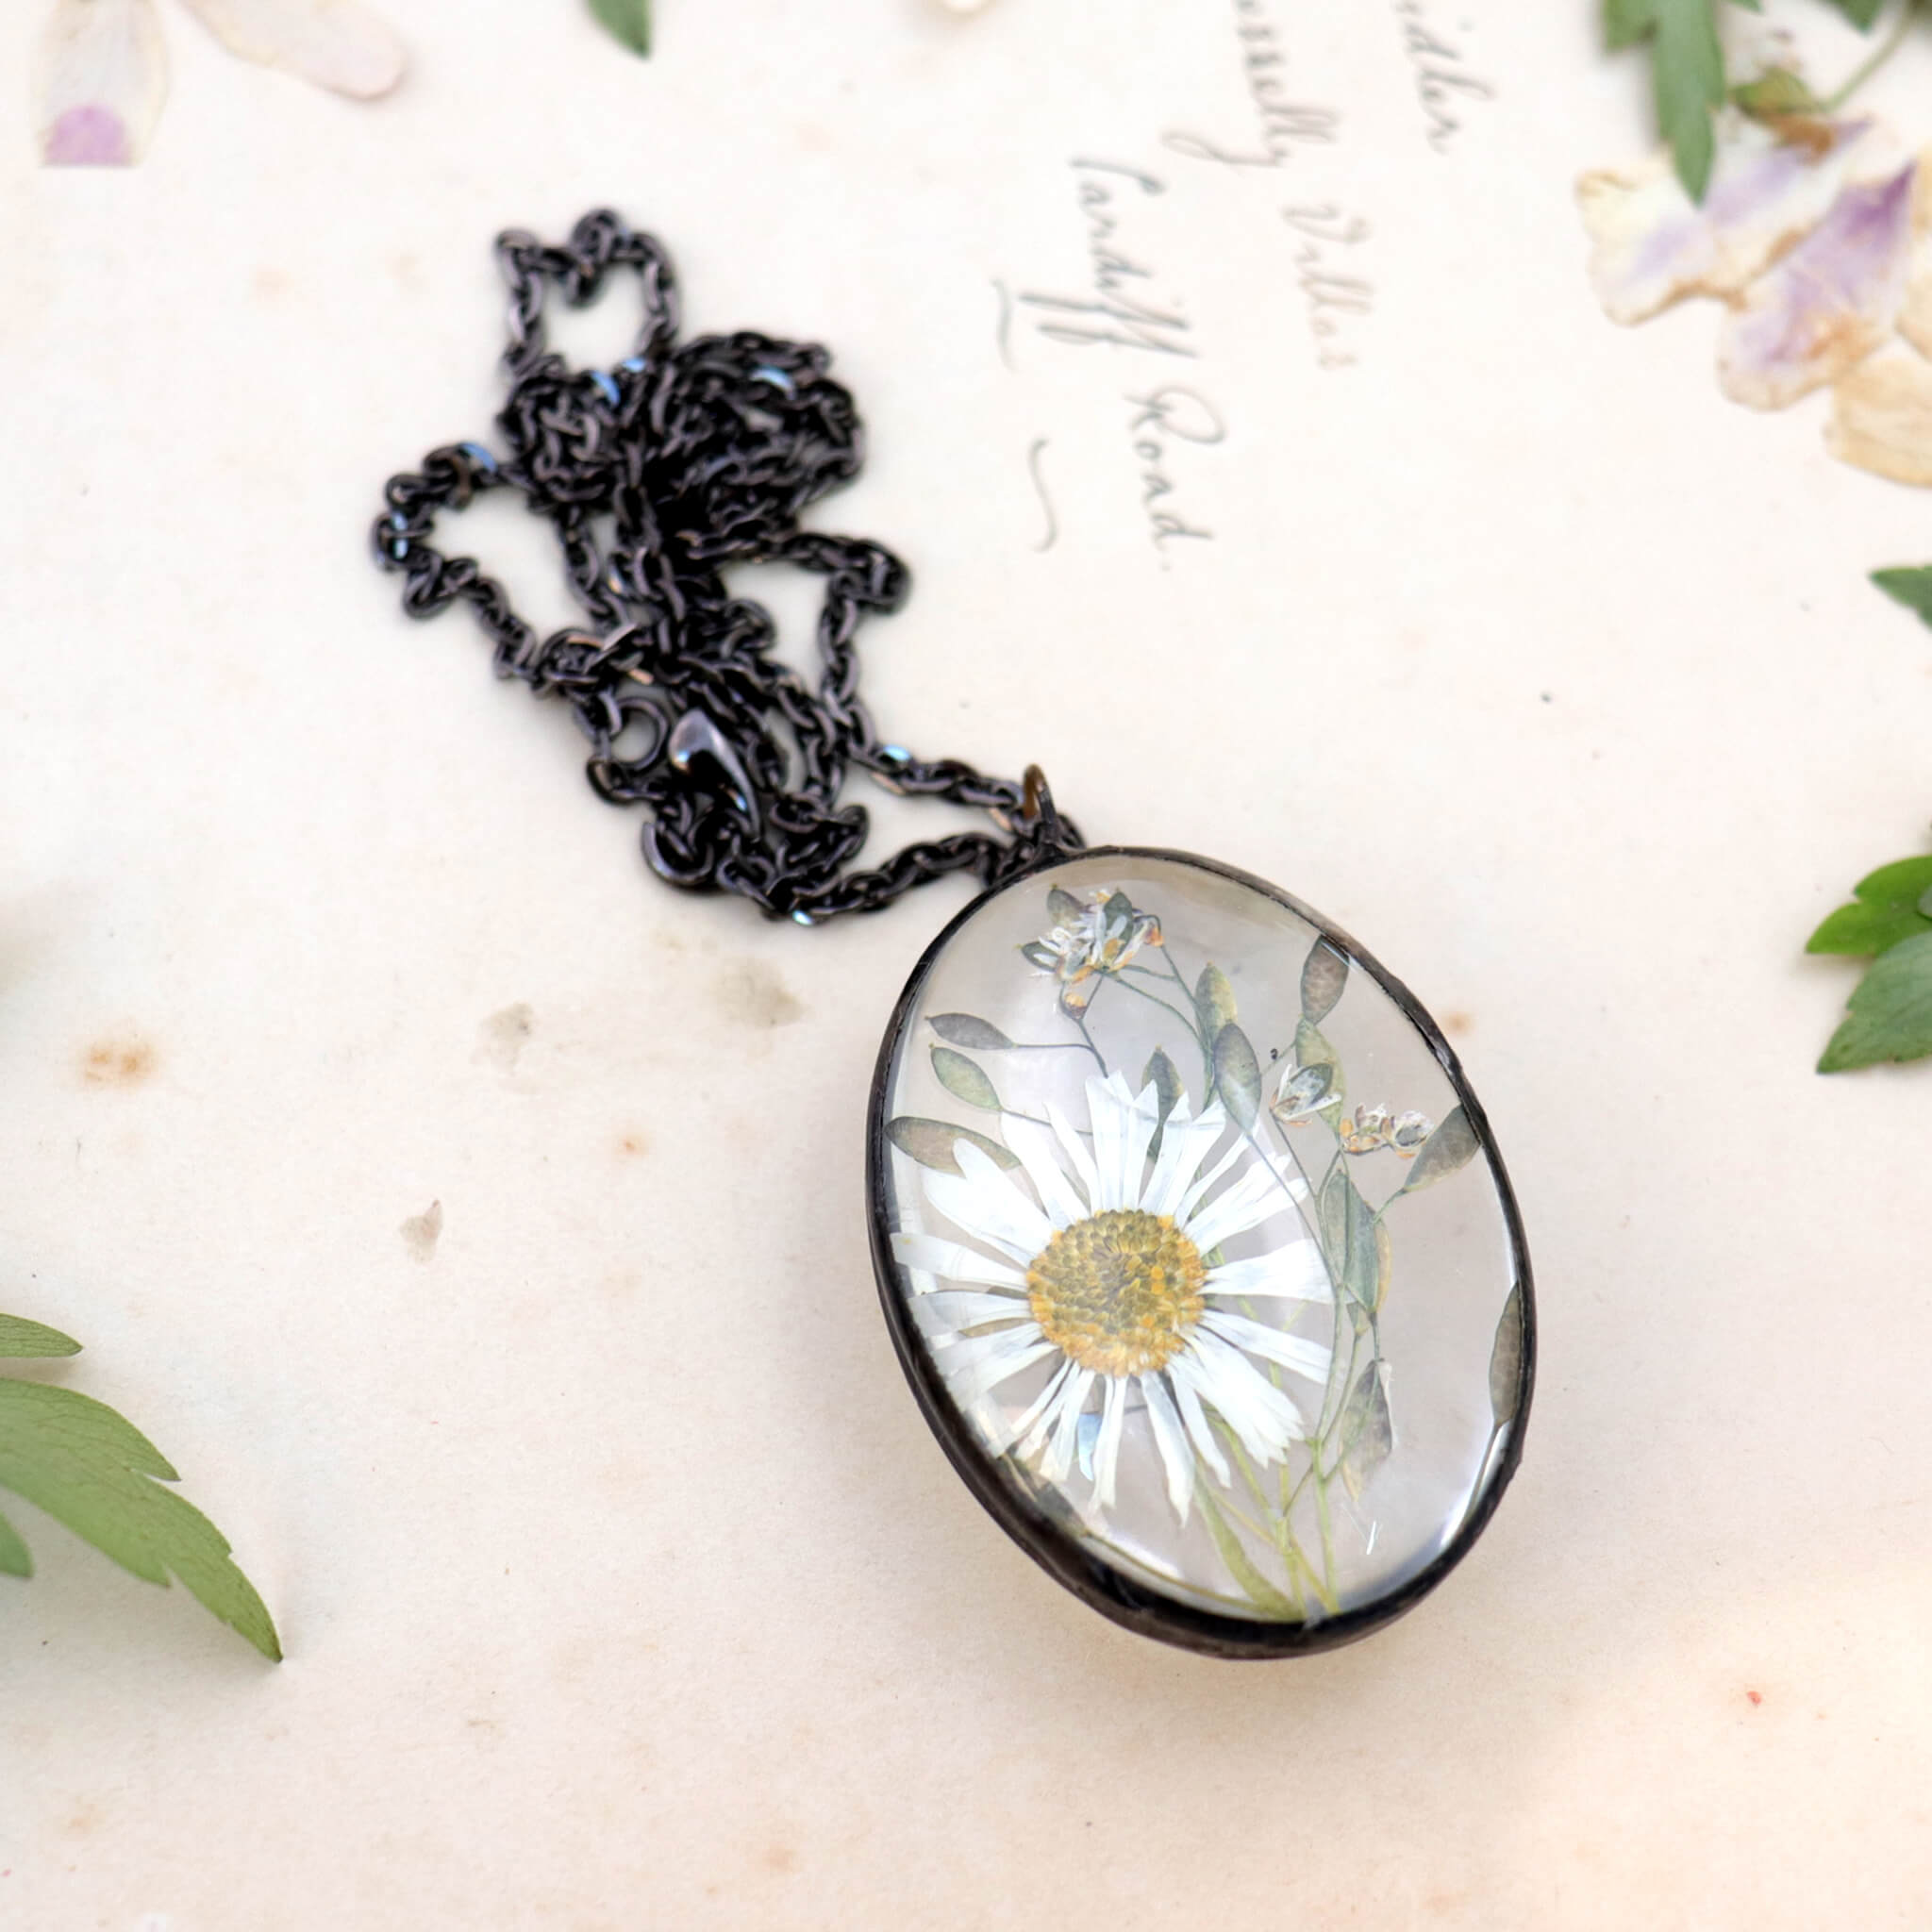 Pressed daisy necklace in oval shape lying on an old paper. Pressed anemones around